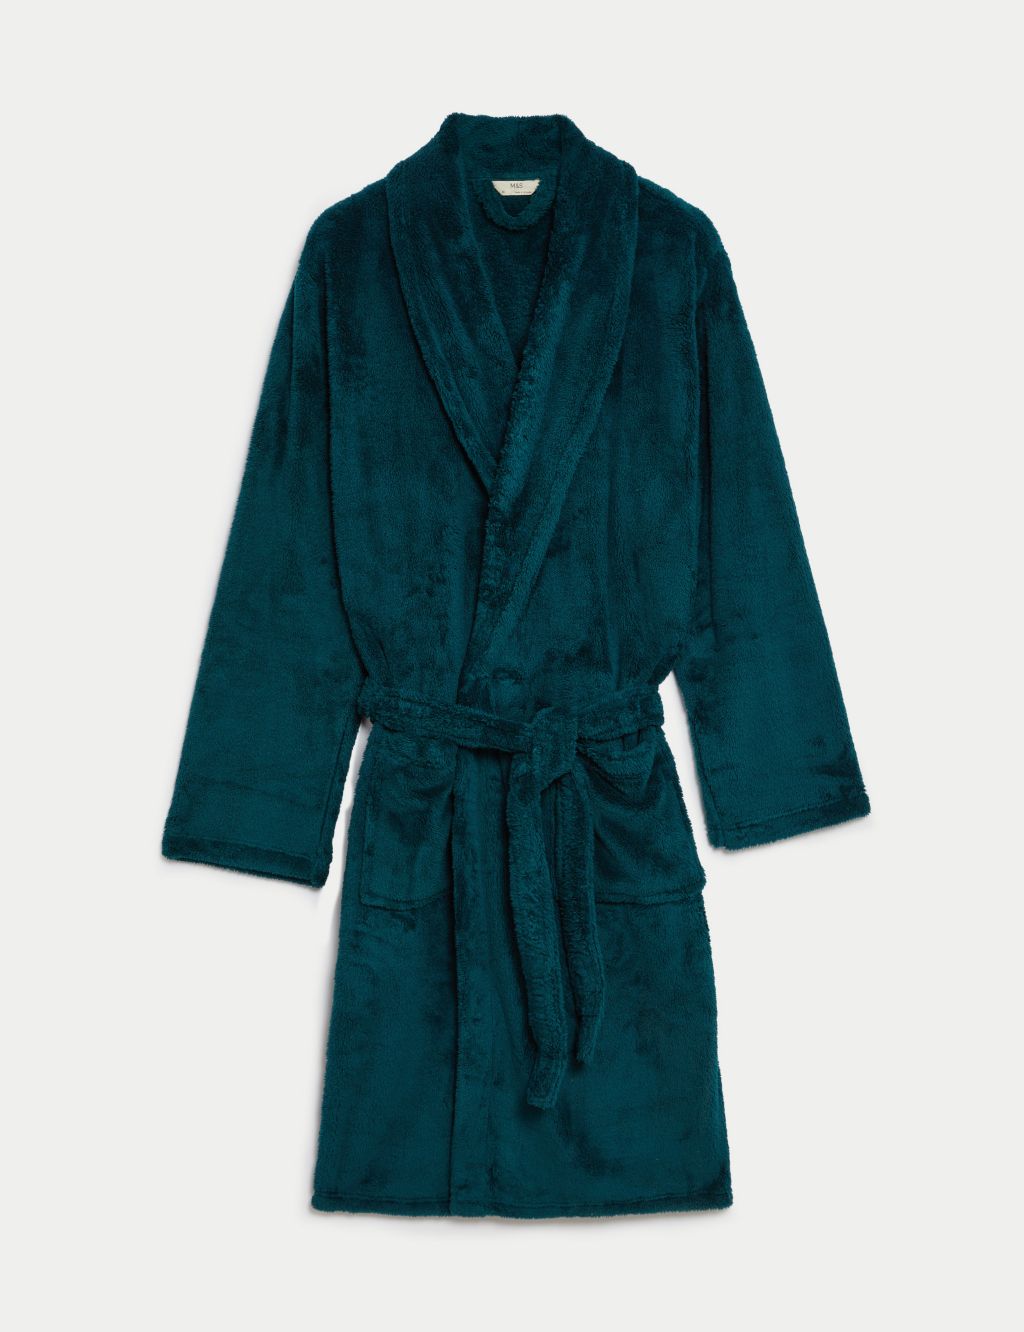 Fleece Supersoft Dressing Gown image 2